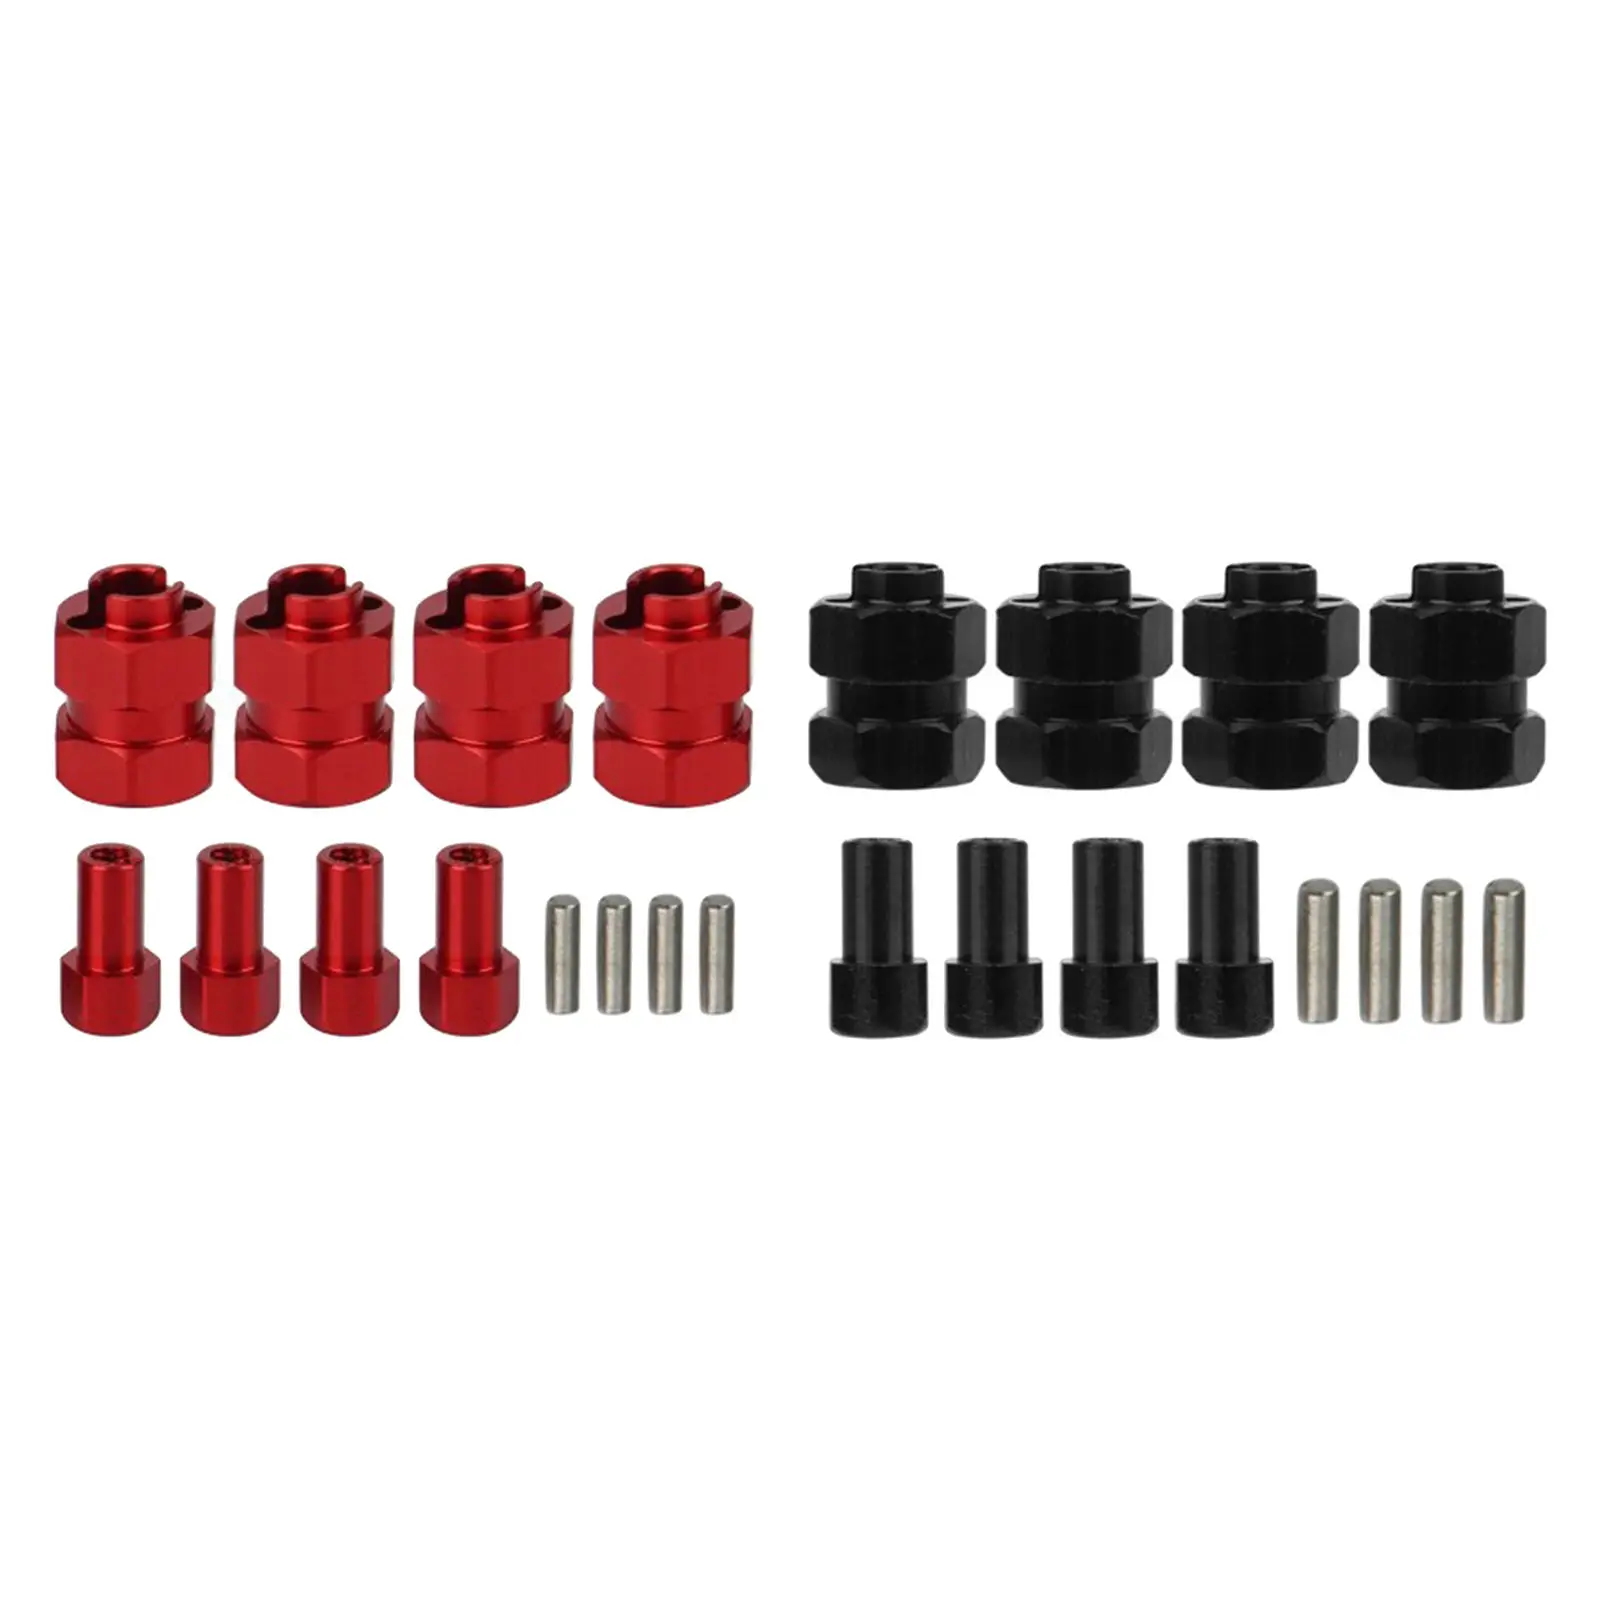 4x Brass Extended Hex Wheel Hubs Combiner 4mm Widened Upgrade for 1/24 Scx24 Axi00002 Vehicles Model Buggy DIY Modified